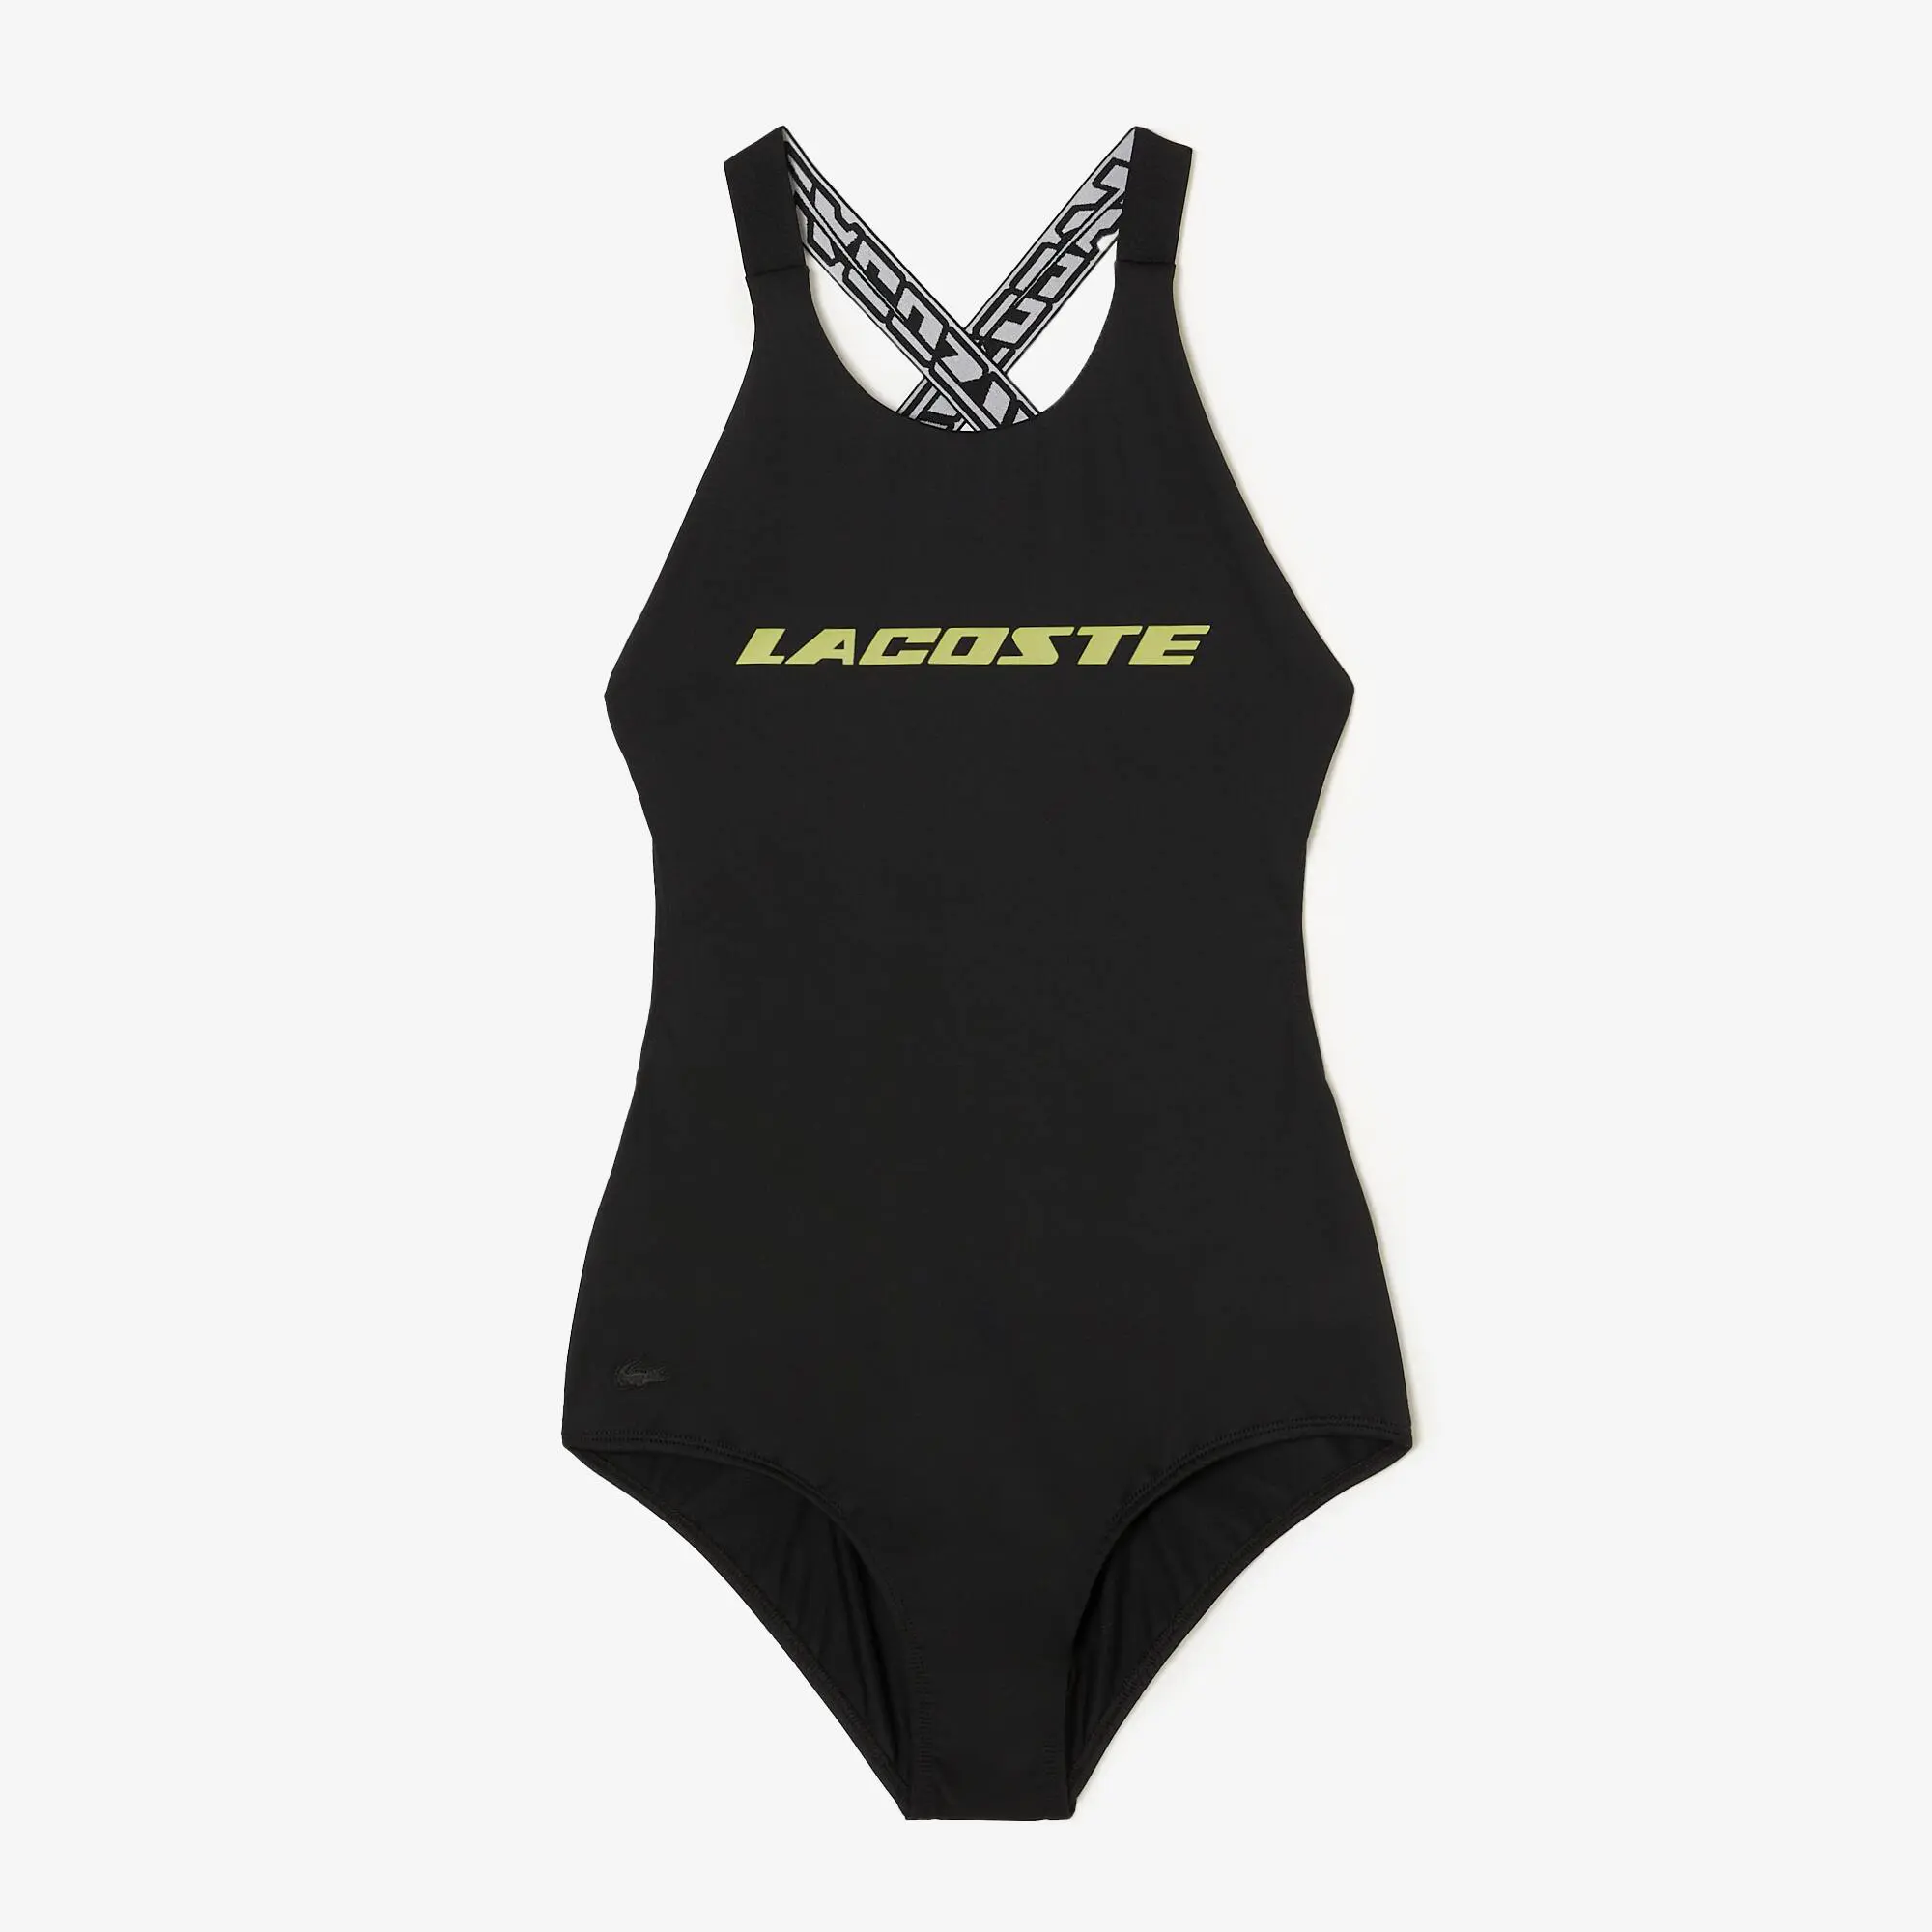 Lacoste Women’s Lacoste One-Piece Recycled Polyester Swimsuit. 2